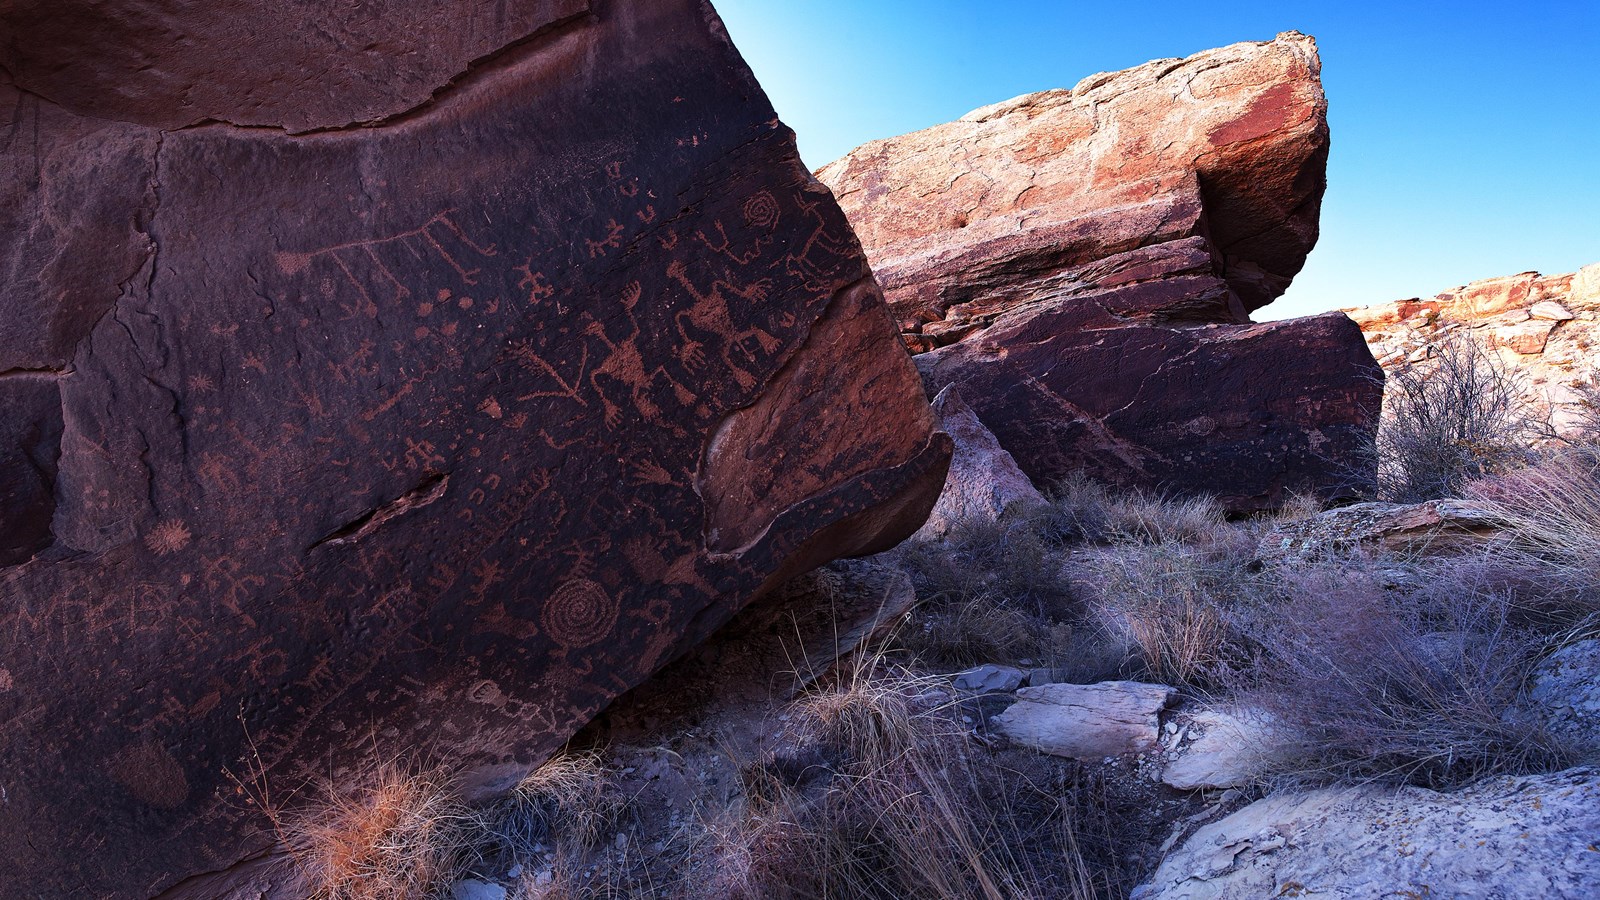 Sandstone boulders partially in shadow with many pecked and incised symbols on the sides.